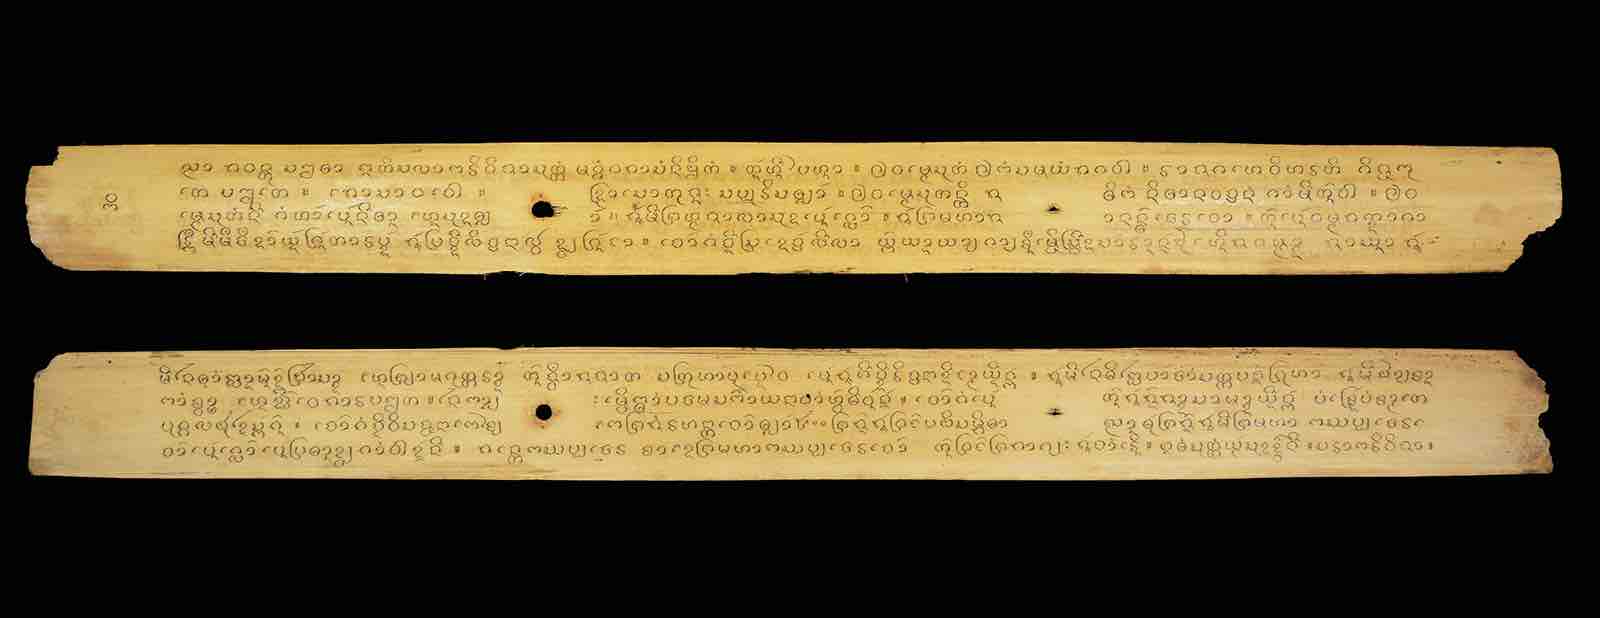 Buddhist palm-leaf manuscript containing the Suttanta doctrine (ສະຣາກະຣິວິຊາສູດ) written in 1855, from Luang Prabang, Laos. (<a href='https://www.hmmlcloud.org/dreamsea/detail.php?msid=144'>DREAMSEA Project Number DS 0011 00001</a>)